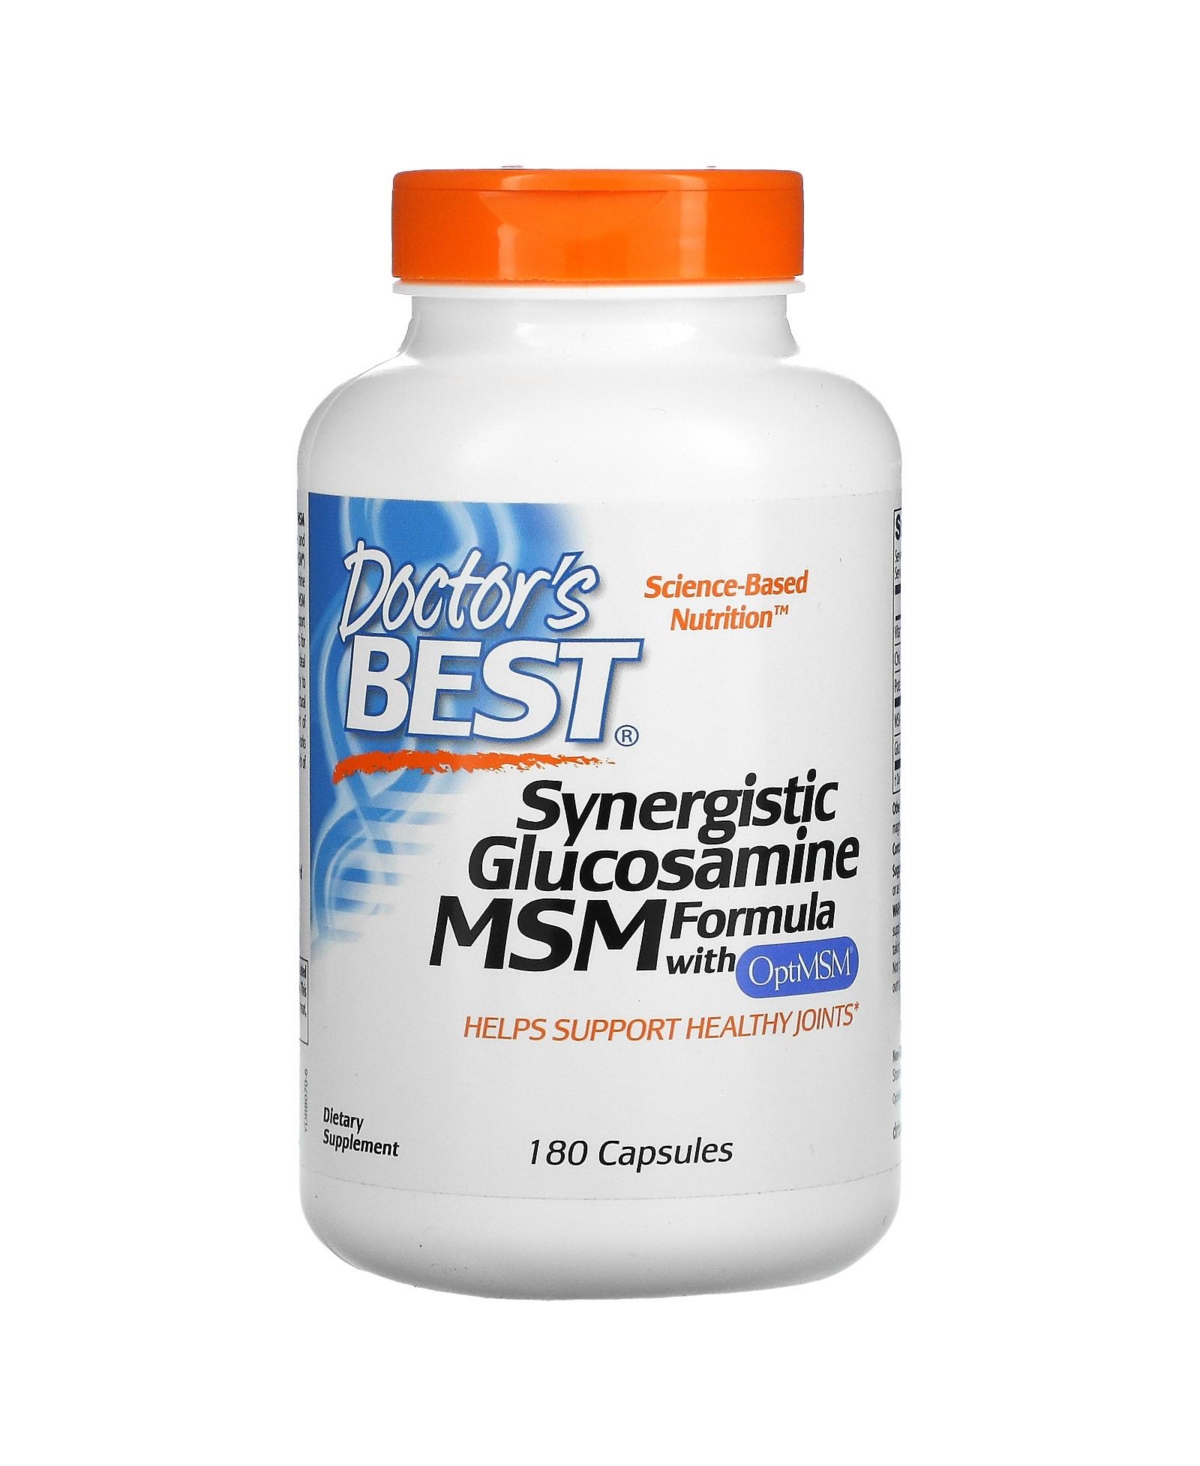 Synergistic Glucosamine Msm Formula with OptiMSM - 180 Capsules - Assorted Pre-Pack